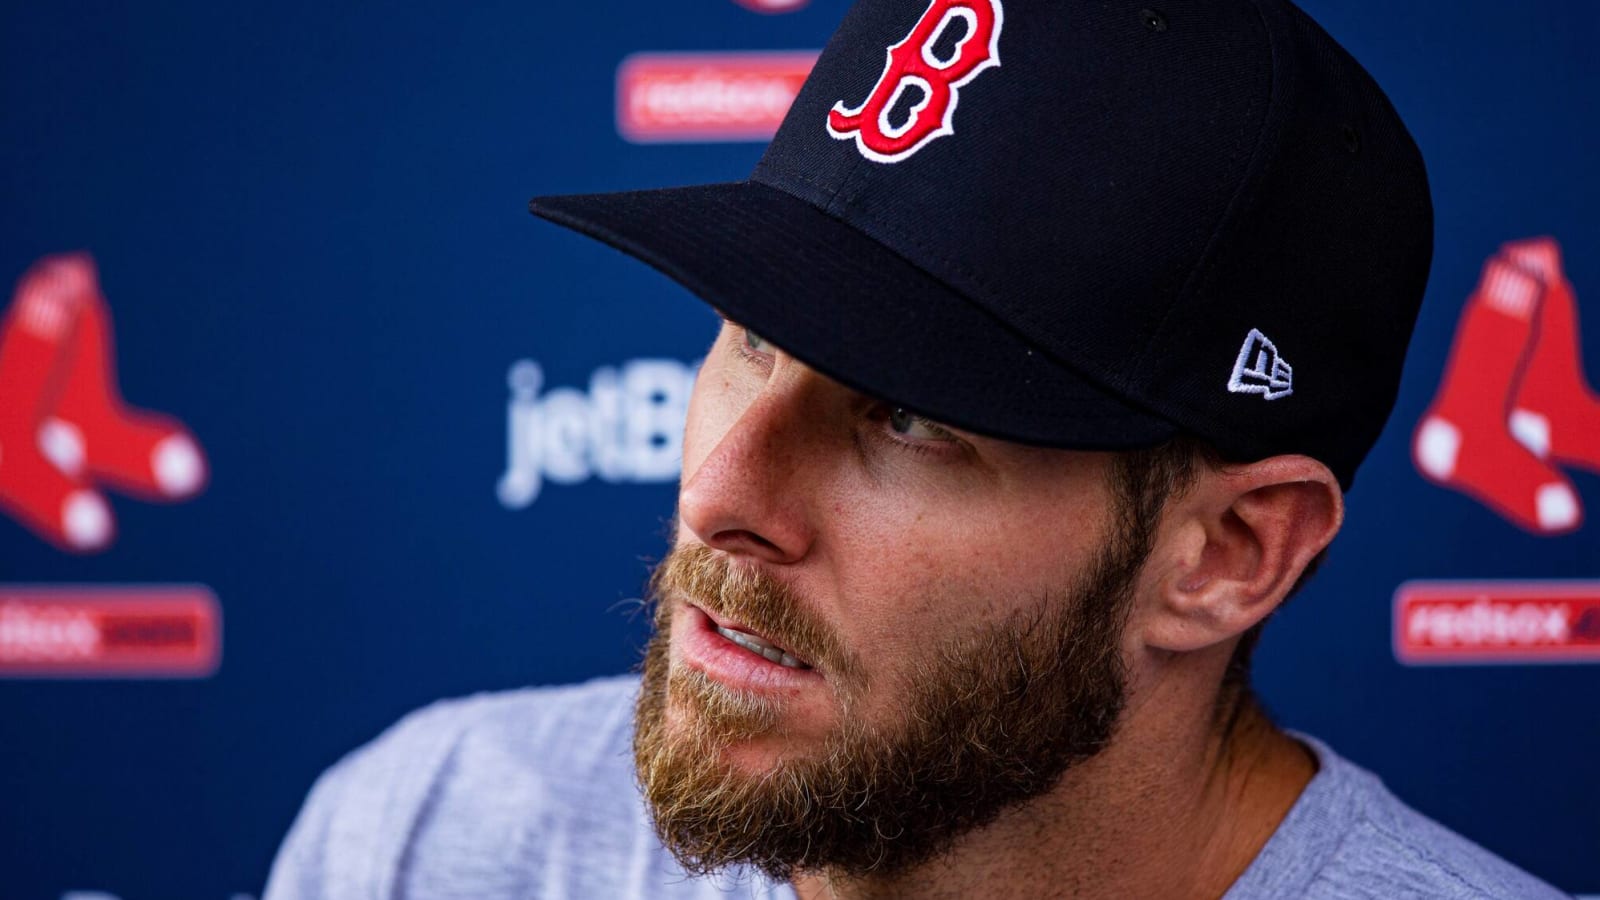 Red Sox ace Chris Sale makes bold claim about cheating in MLB